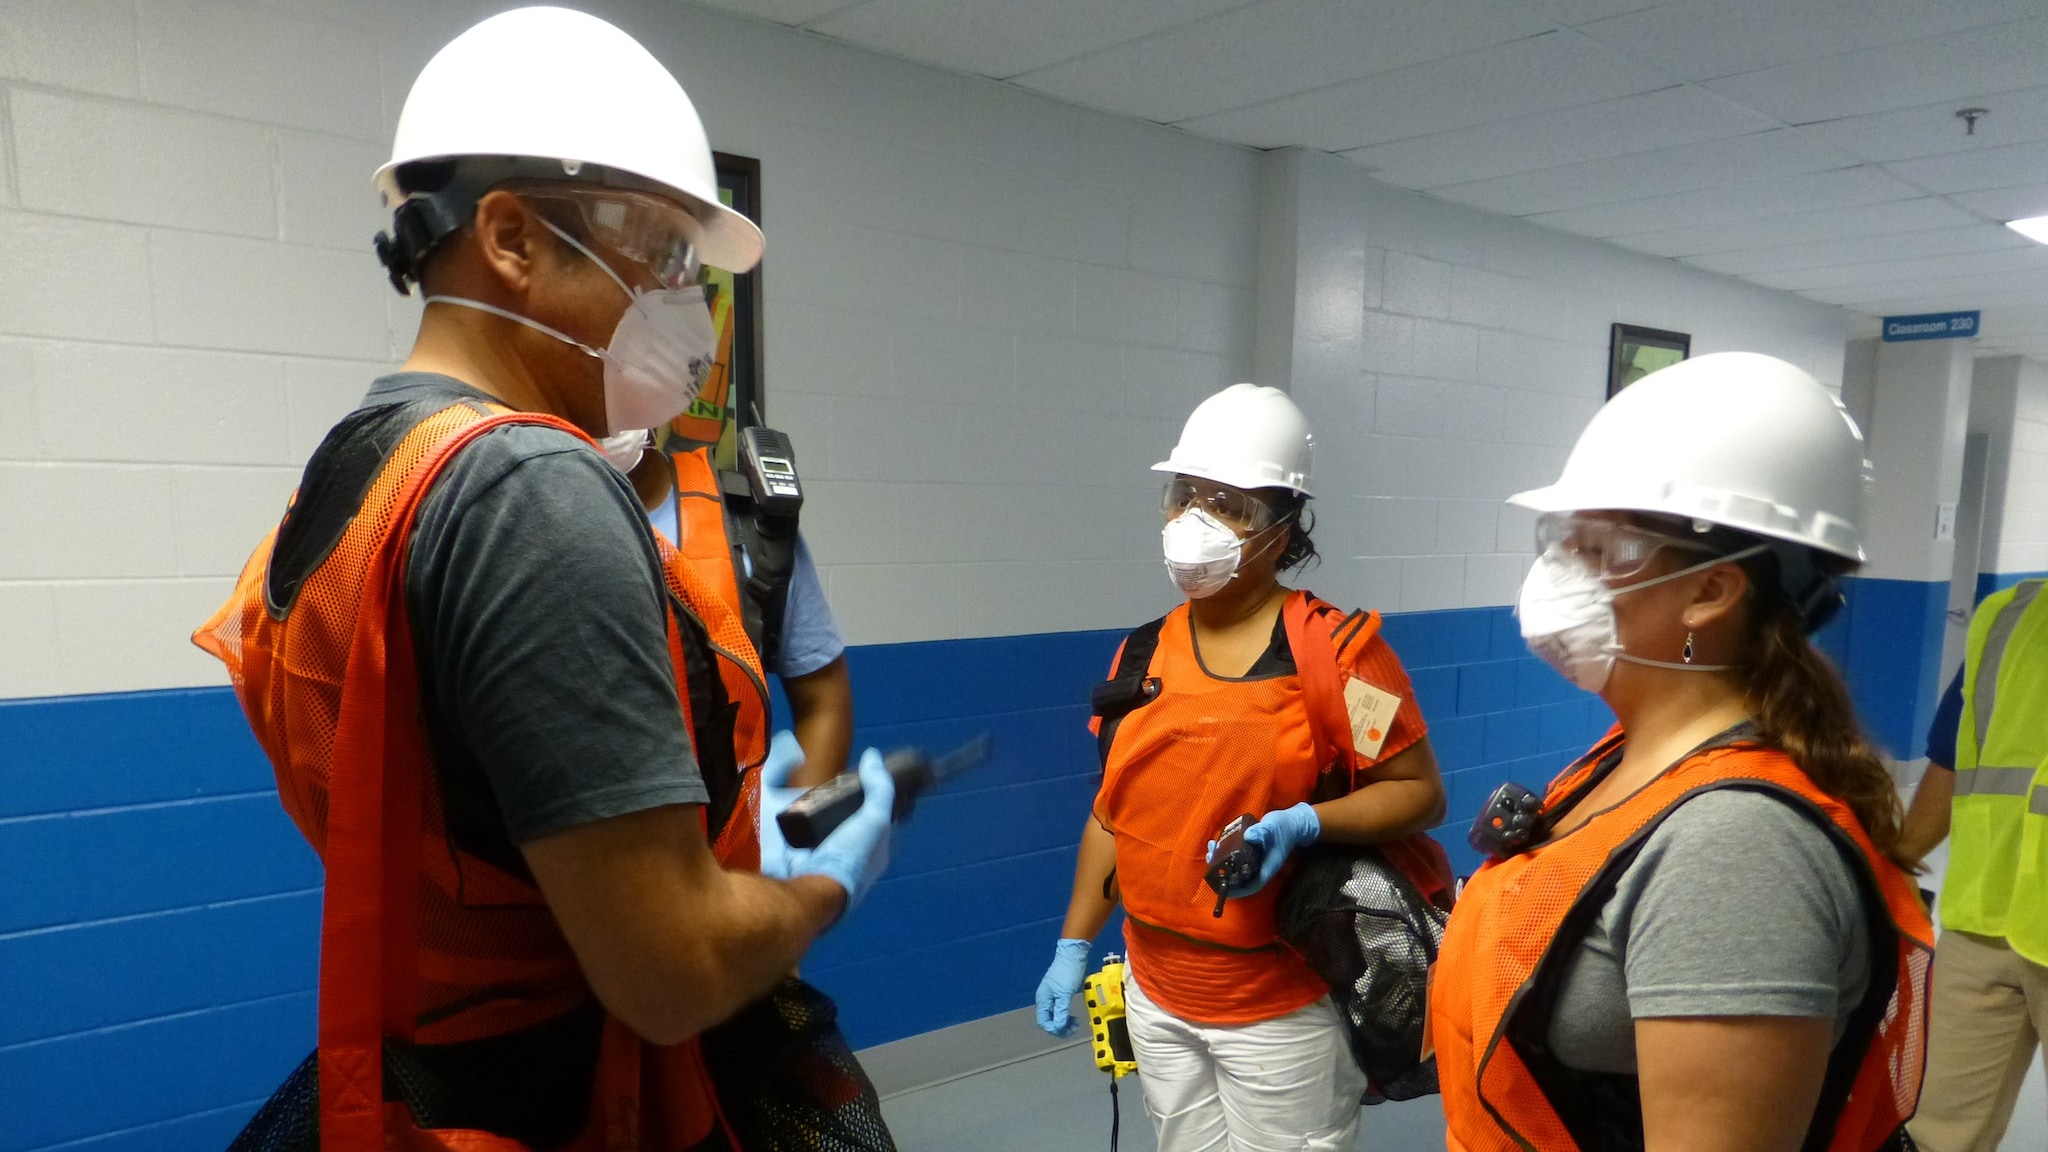 A group of people in hard hats and neon vests inside a building.